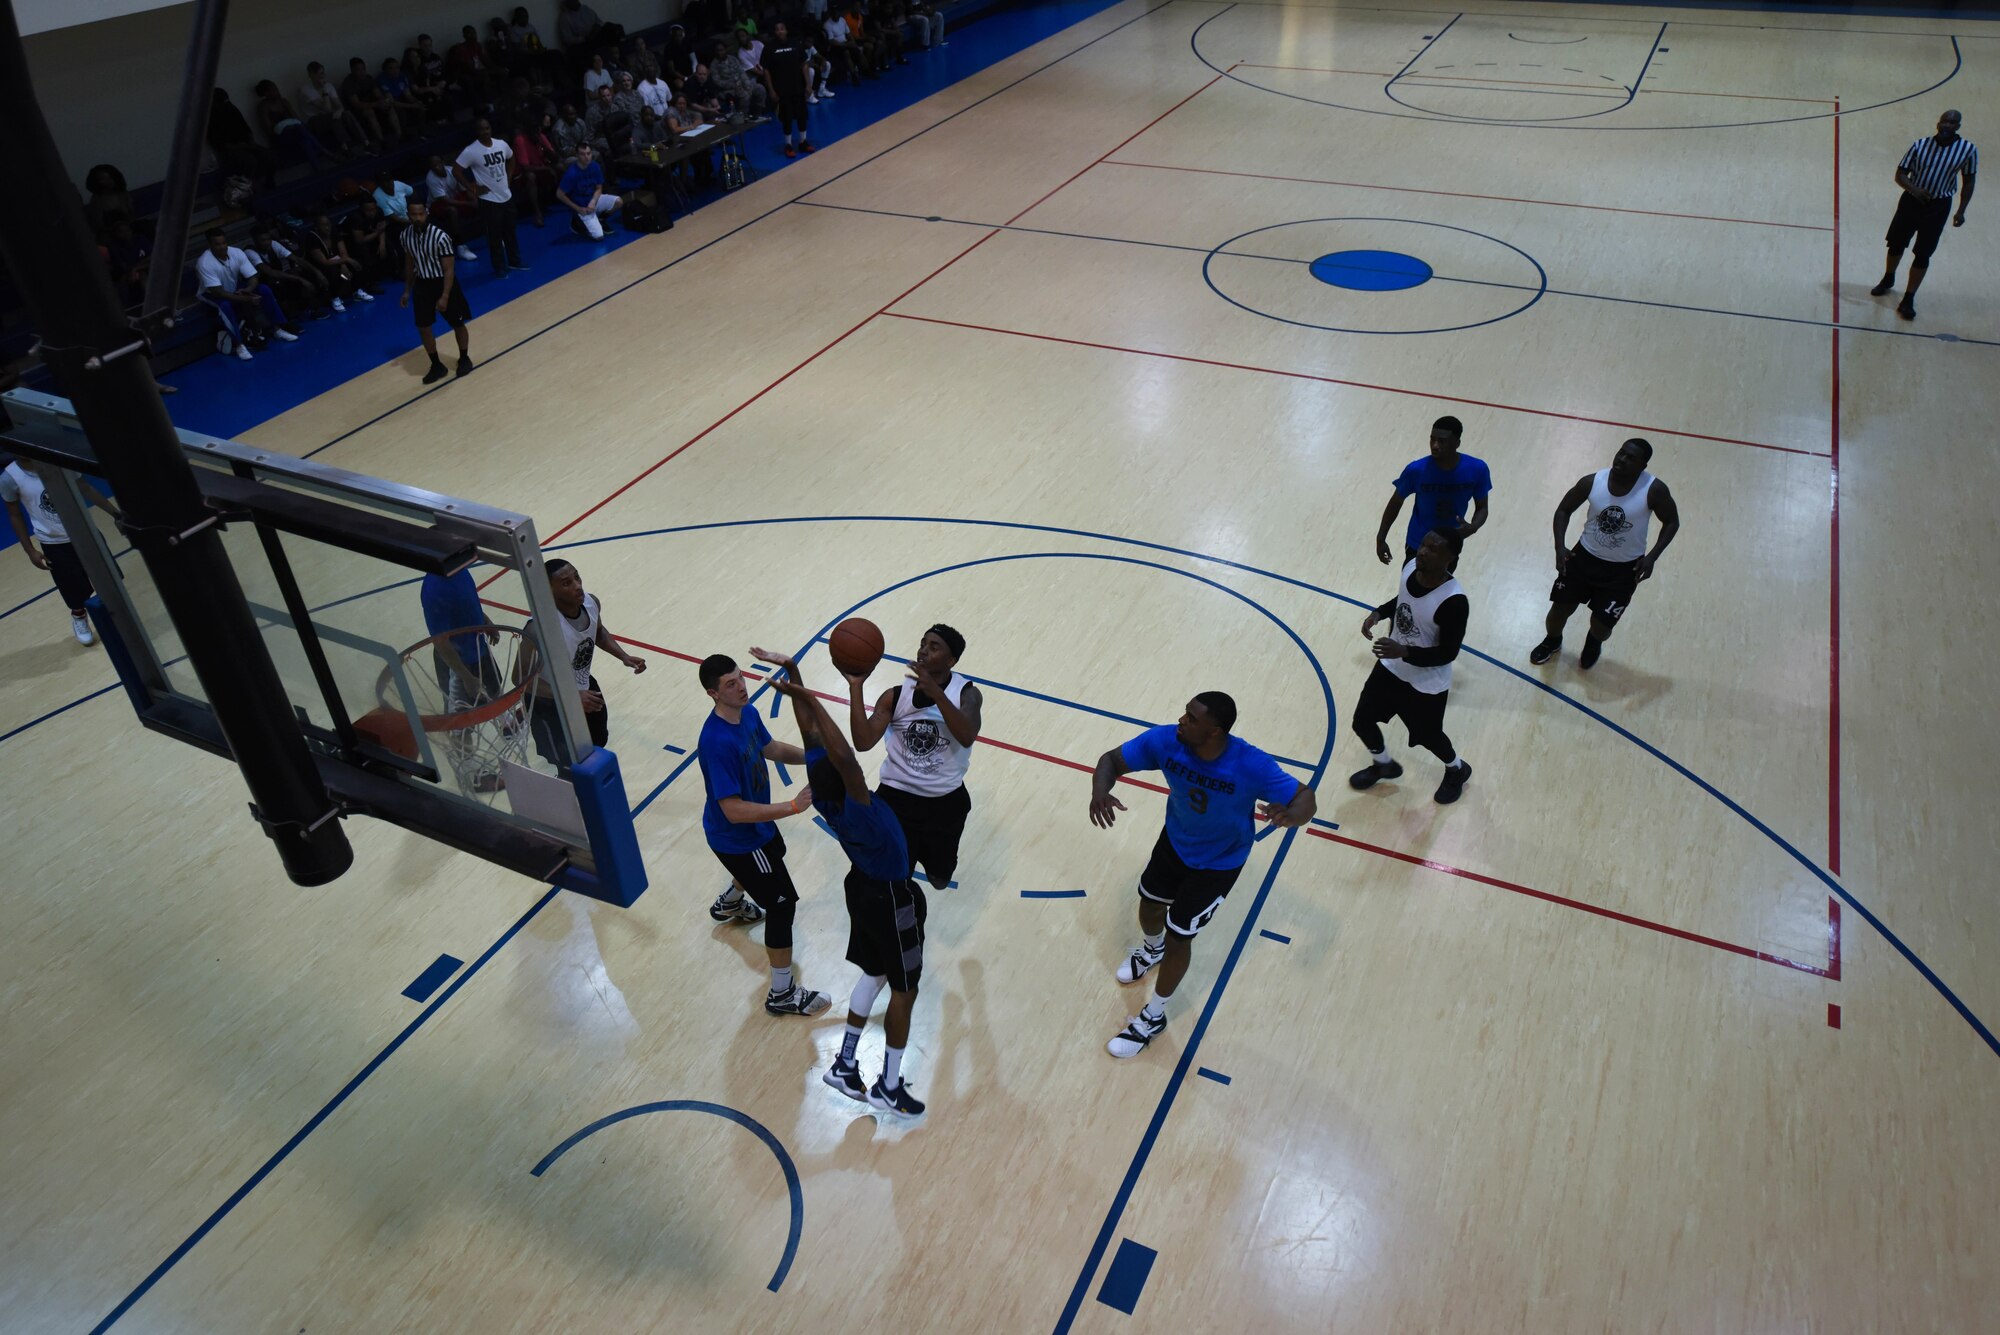 The 2nd Force Support Squadron and 2nd Security Forces Squadron basketball teams play game two of the Intramural Basketball Championship at Barksdale Air Force Base, La., April 18, 2017. In a double elimination tournament, the second game was winner take all. (Air Force photo/Airman 1st Class Stuart Bright)